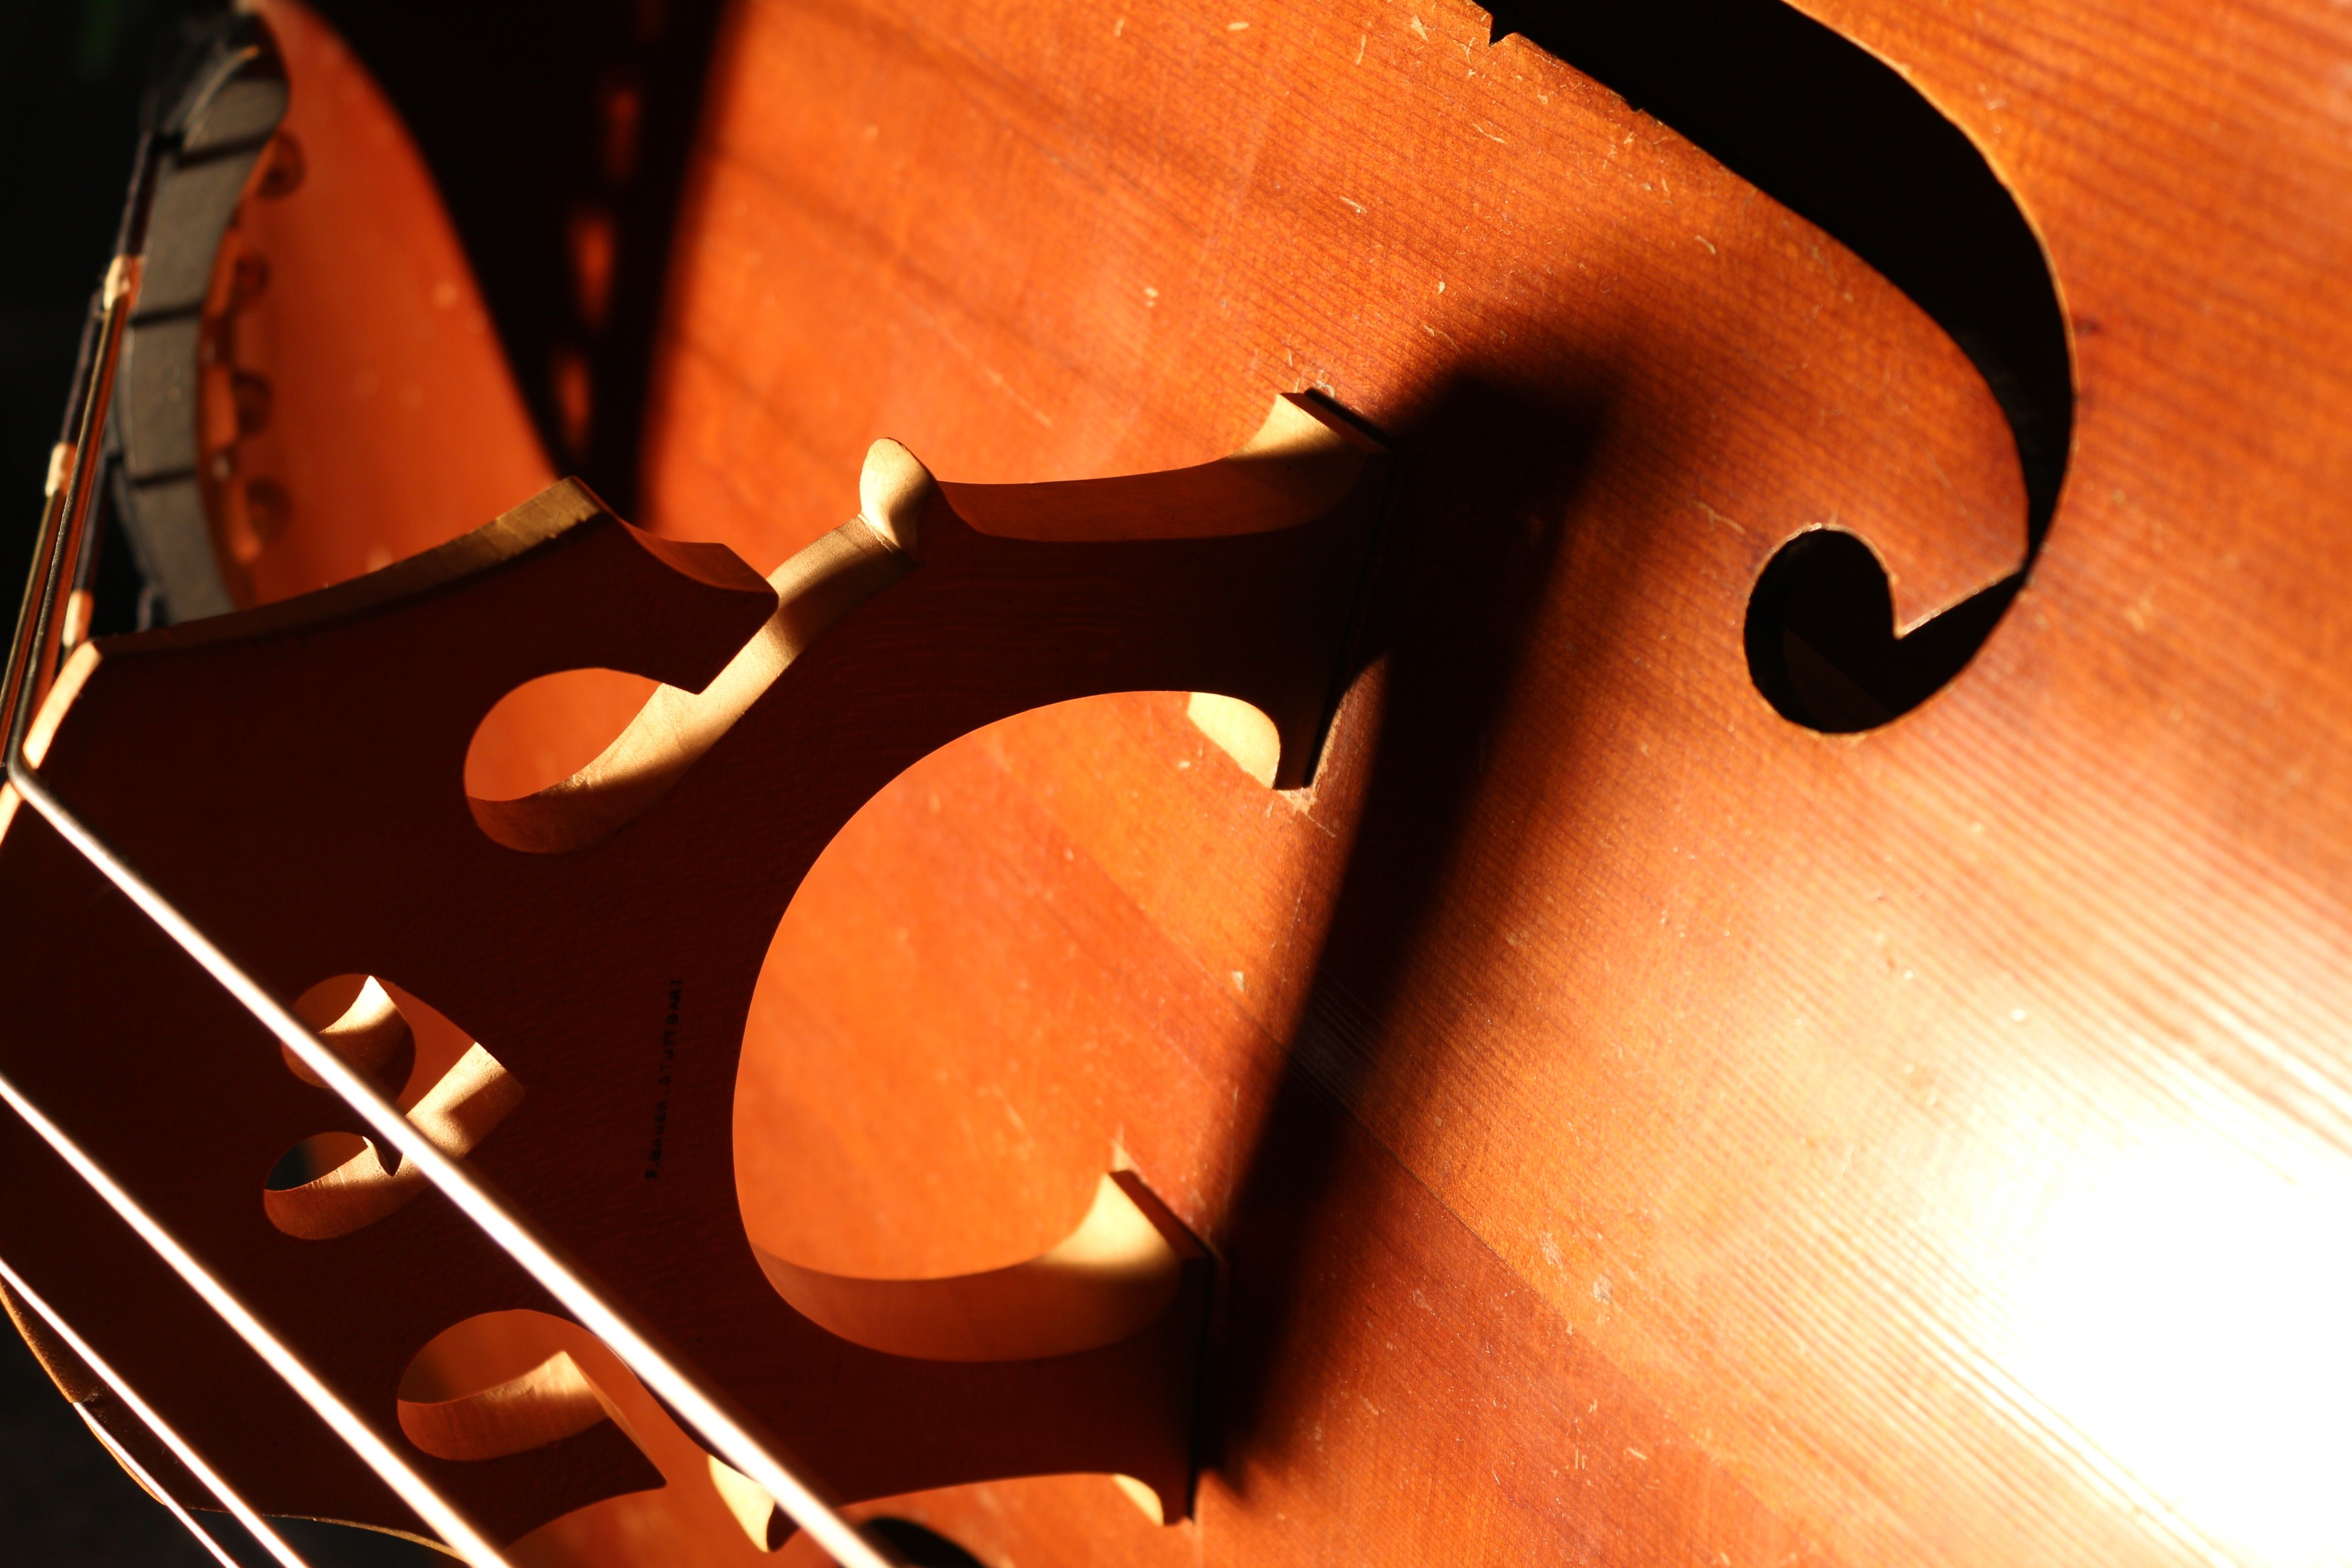 Double Bass Wallpapers